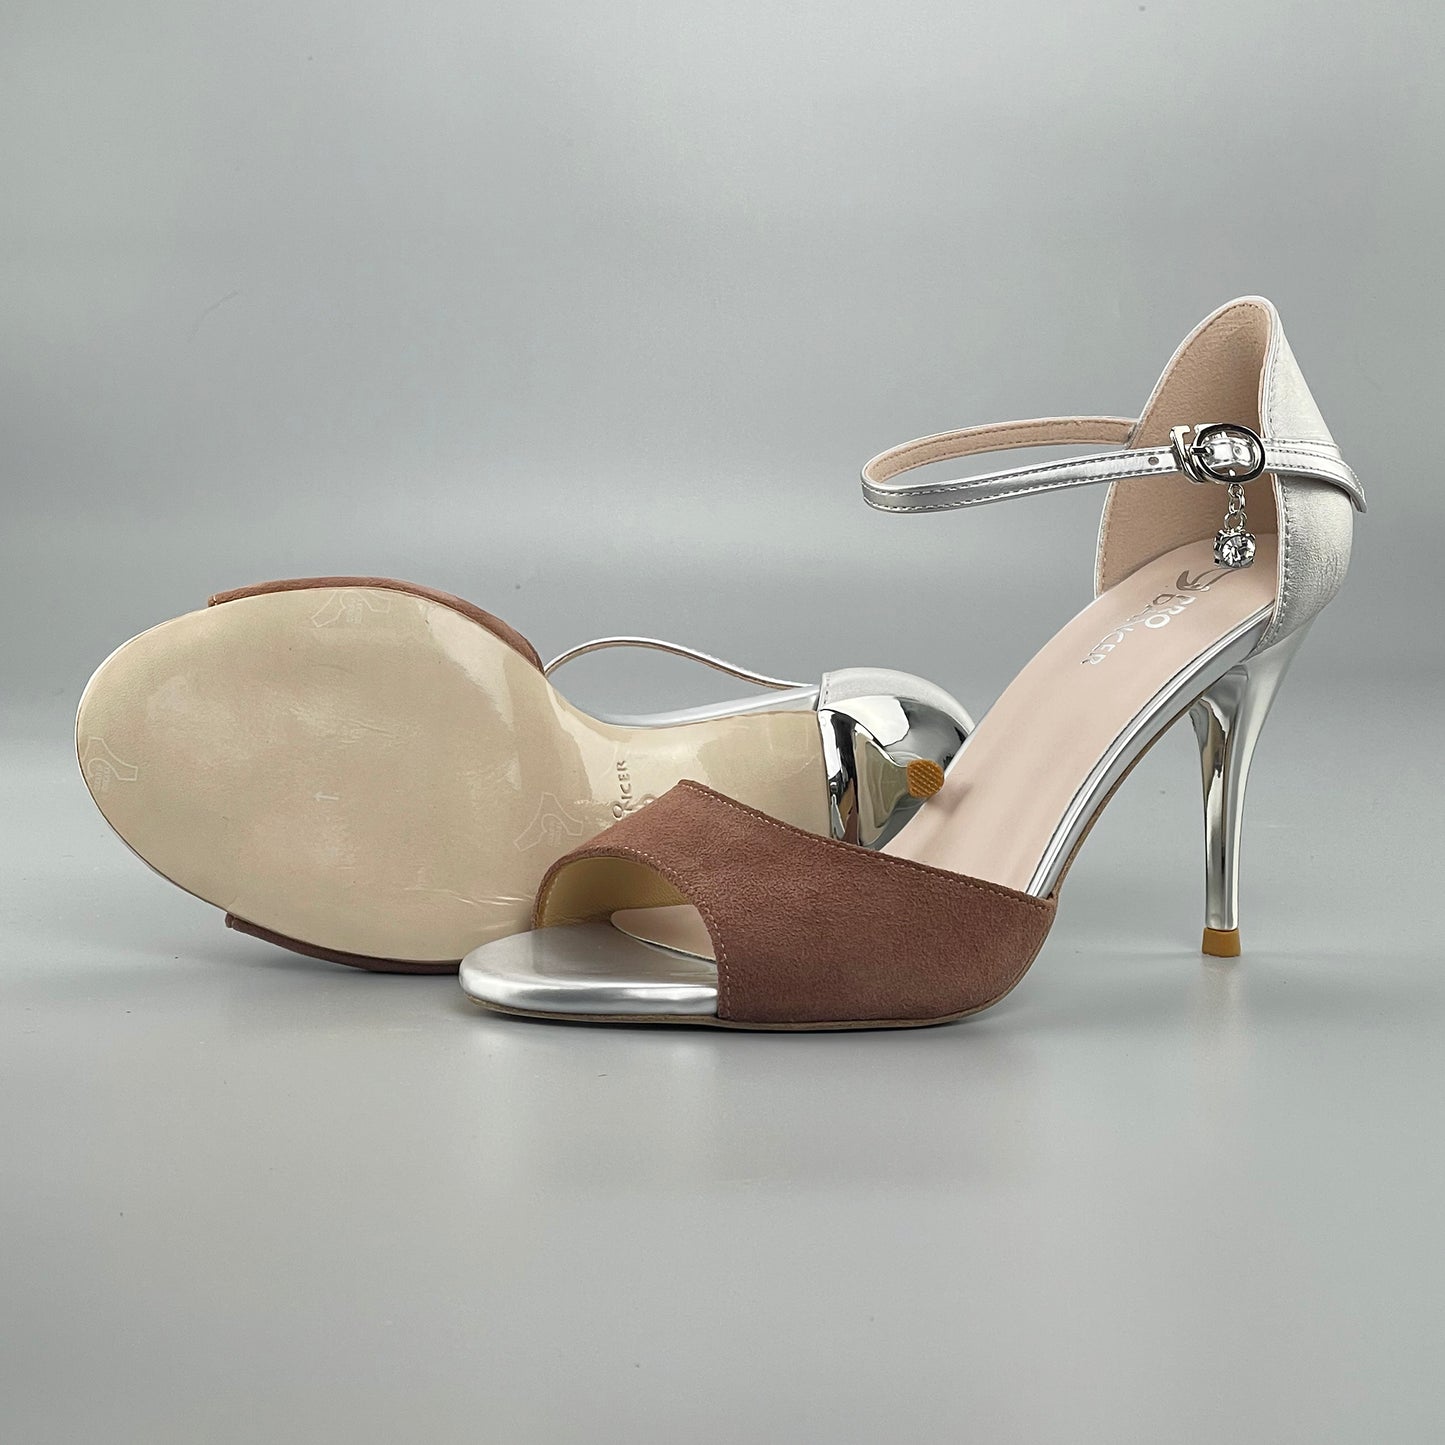 Pro Dancer Open-toe Professional Tango Shoes Closed-back High Heels Hard Leather Sole Brown and Gold (PD-9042D)